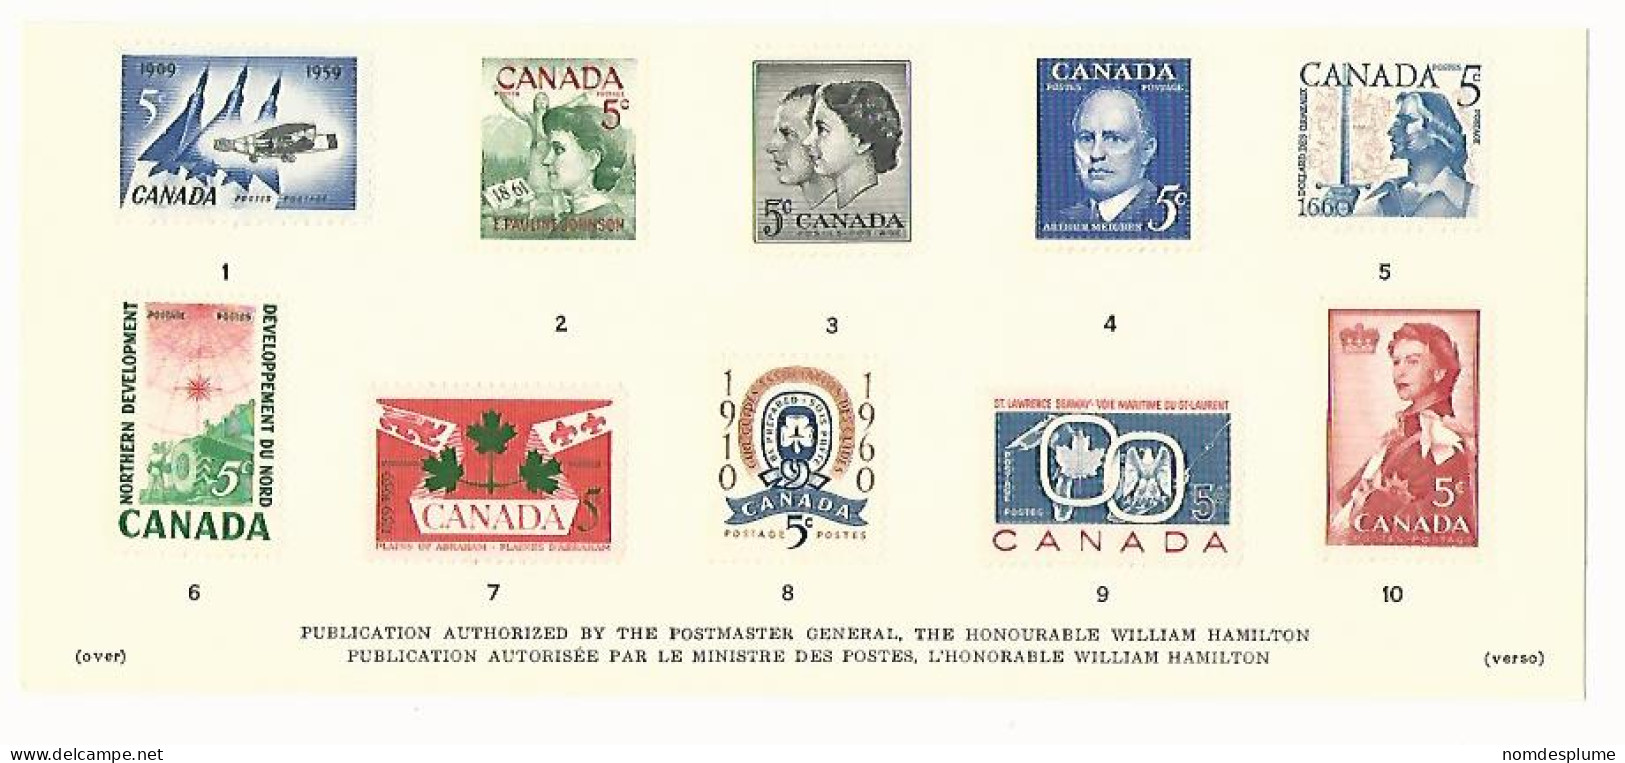 58193) Canada Commemorative Issues Canadian History In Postage Stamps Series #3 - Canada Post Year Sets/merchandise